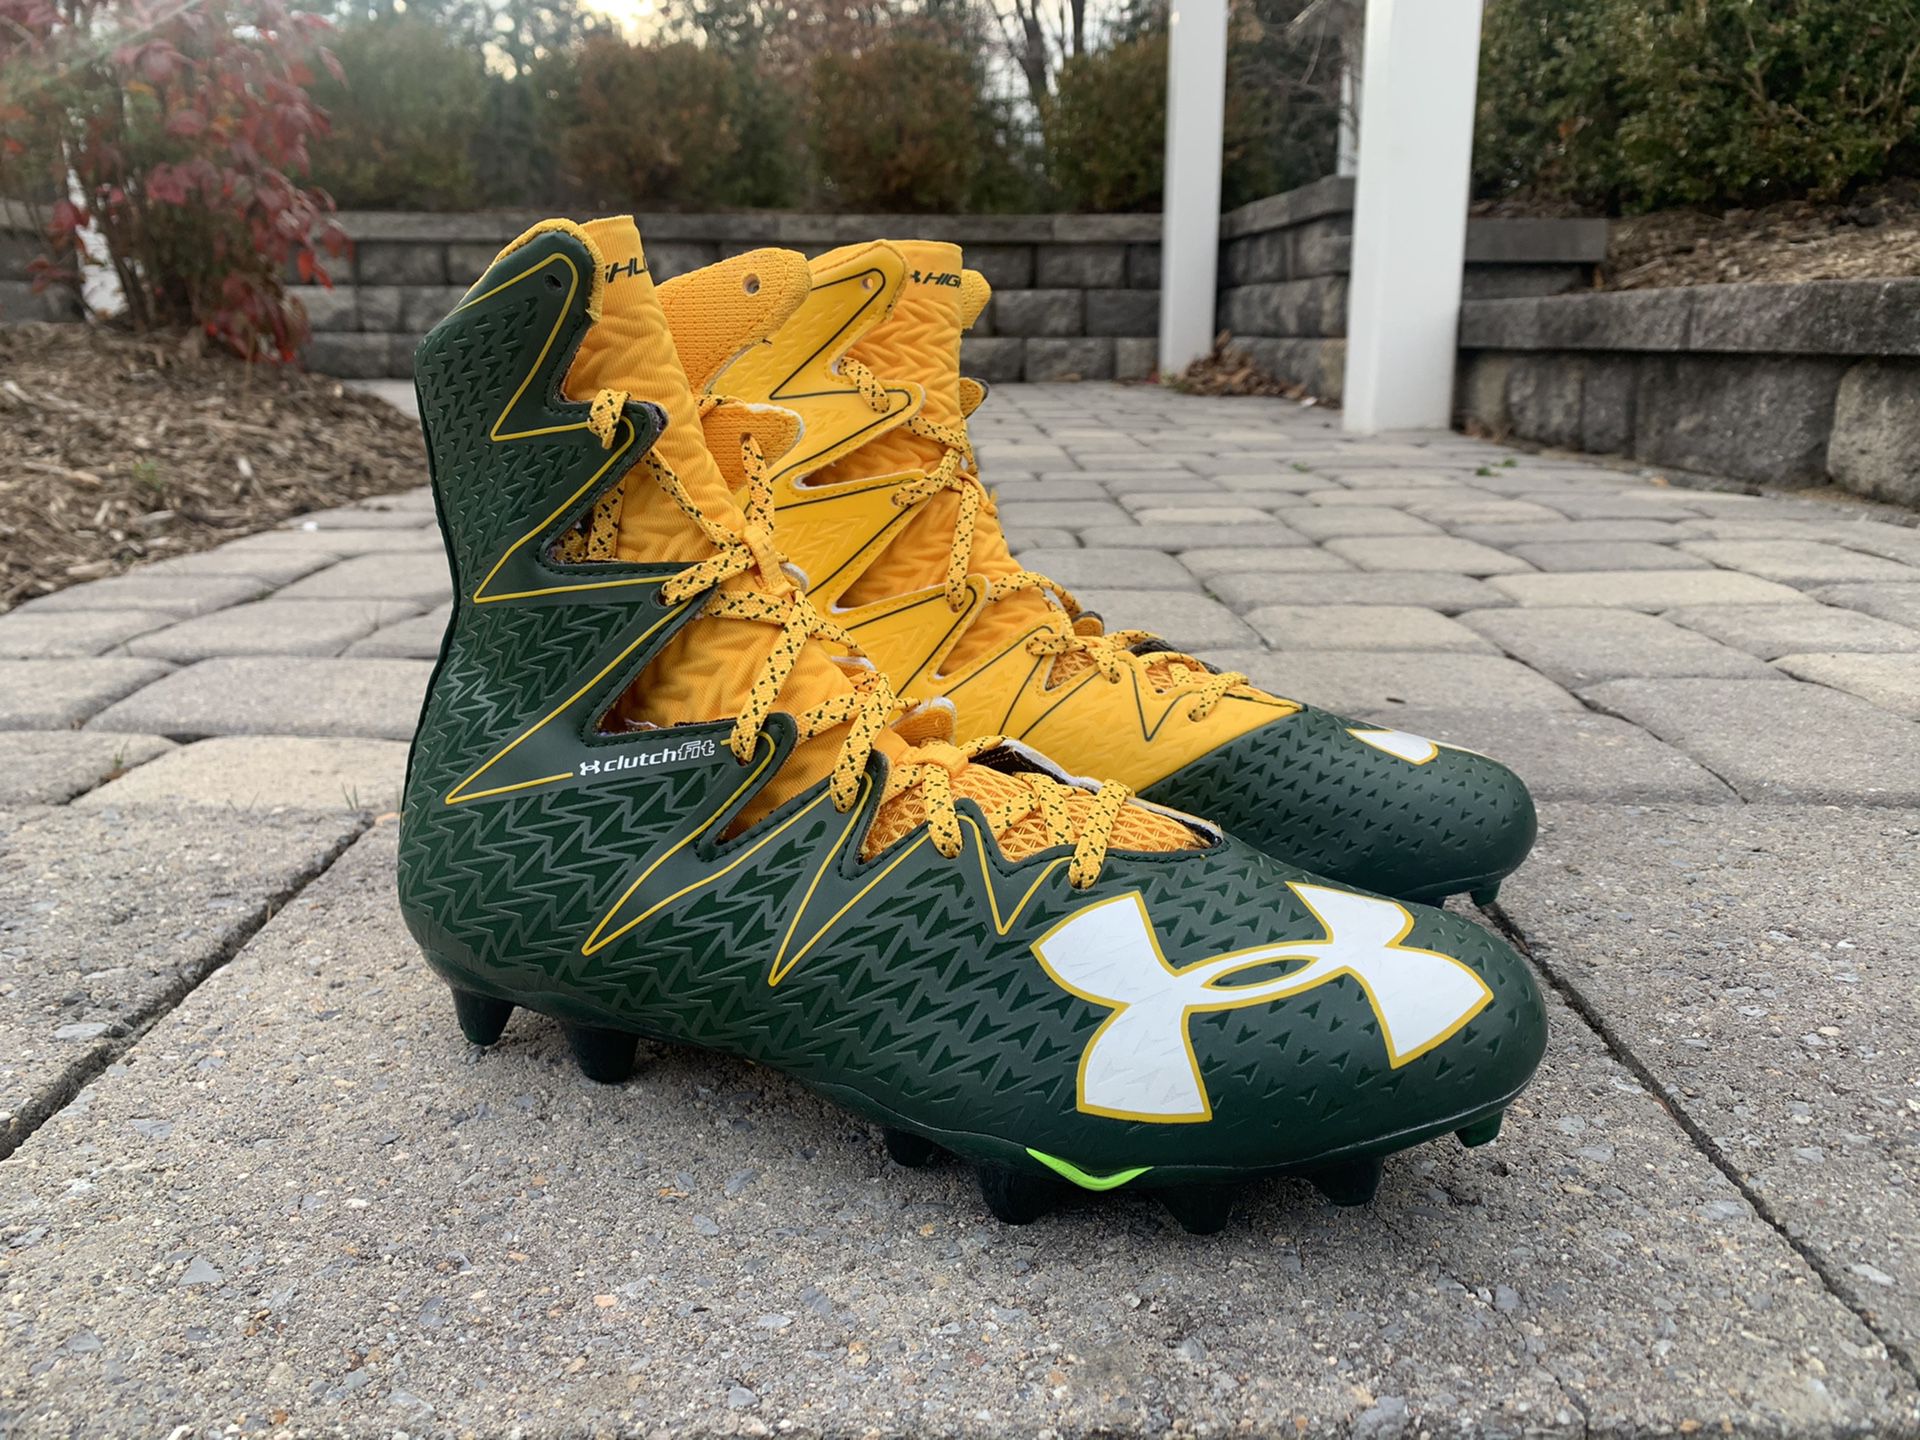 Green and Yellow Lacrosse Cleat Size 10.5